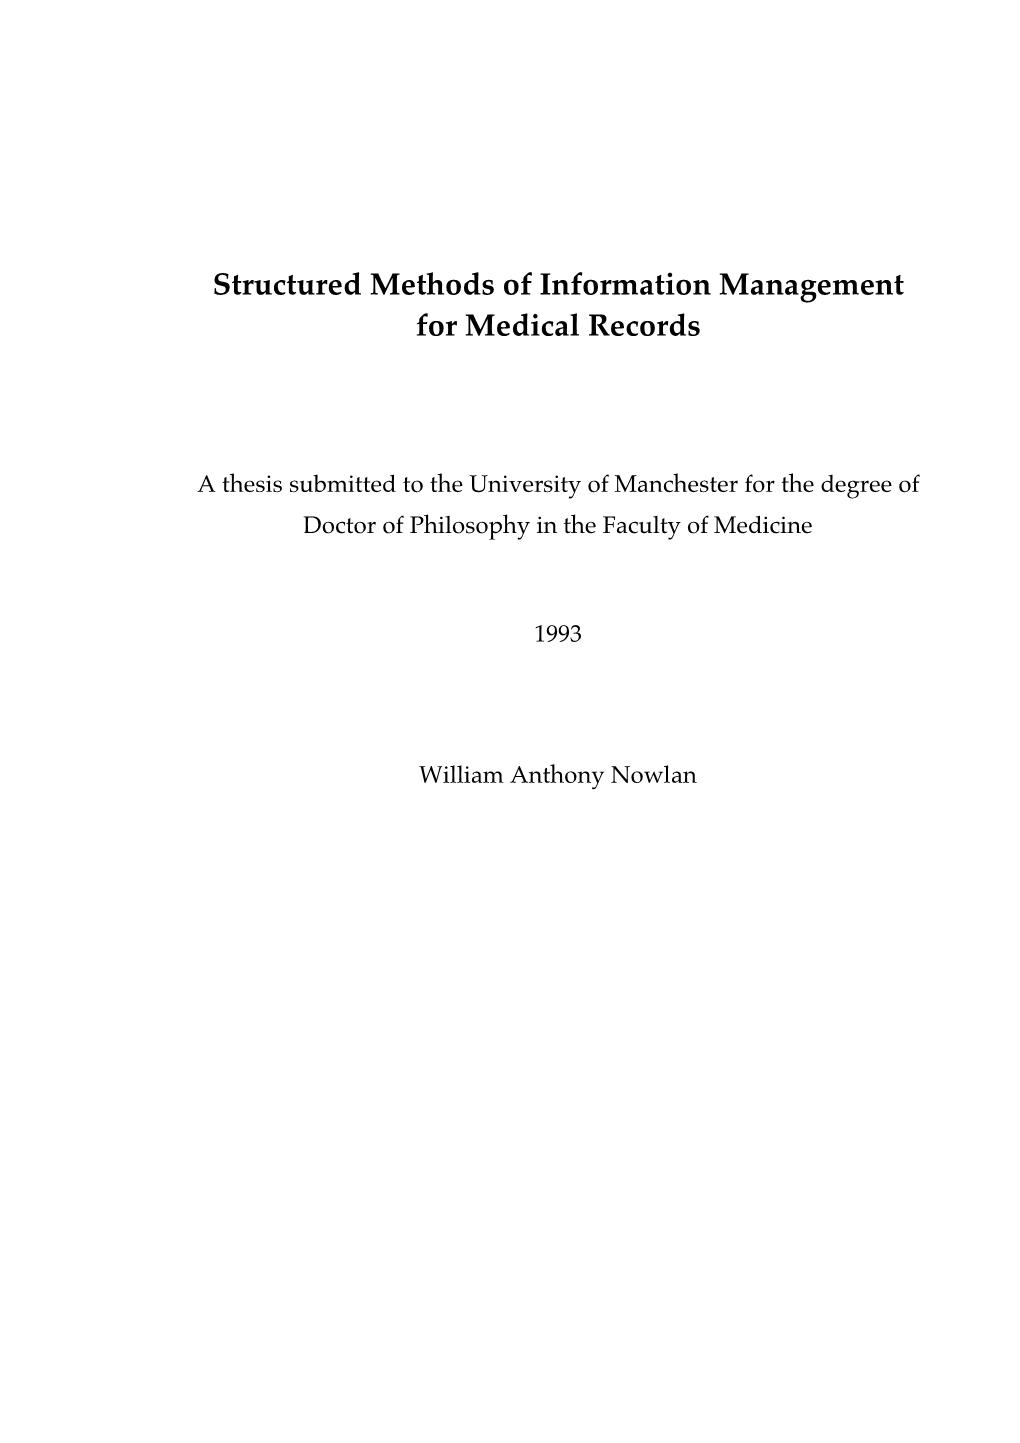 Thesis Submitted to the University of Manchester for the Degree of Doctor of Philosophy in the Faculty of Medicine